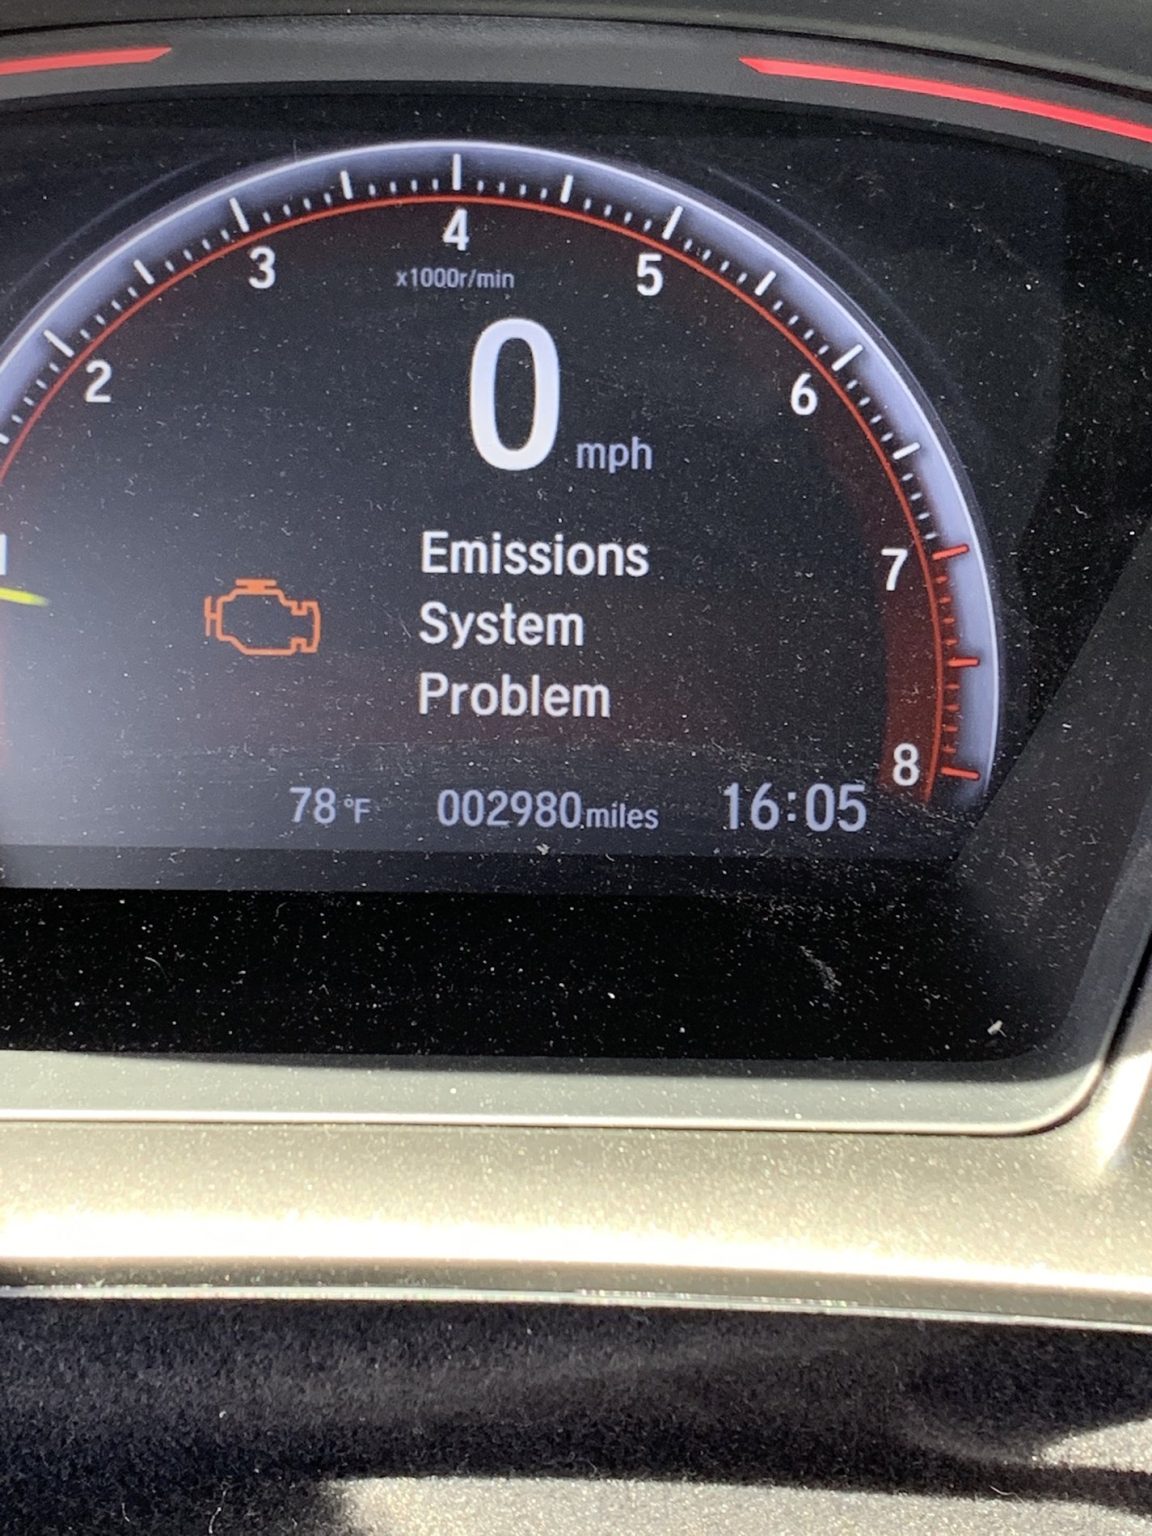 Emissions System Problem On Honda Pilot - What Does It Mean? - Truckile